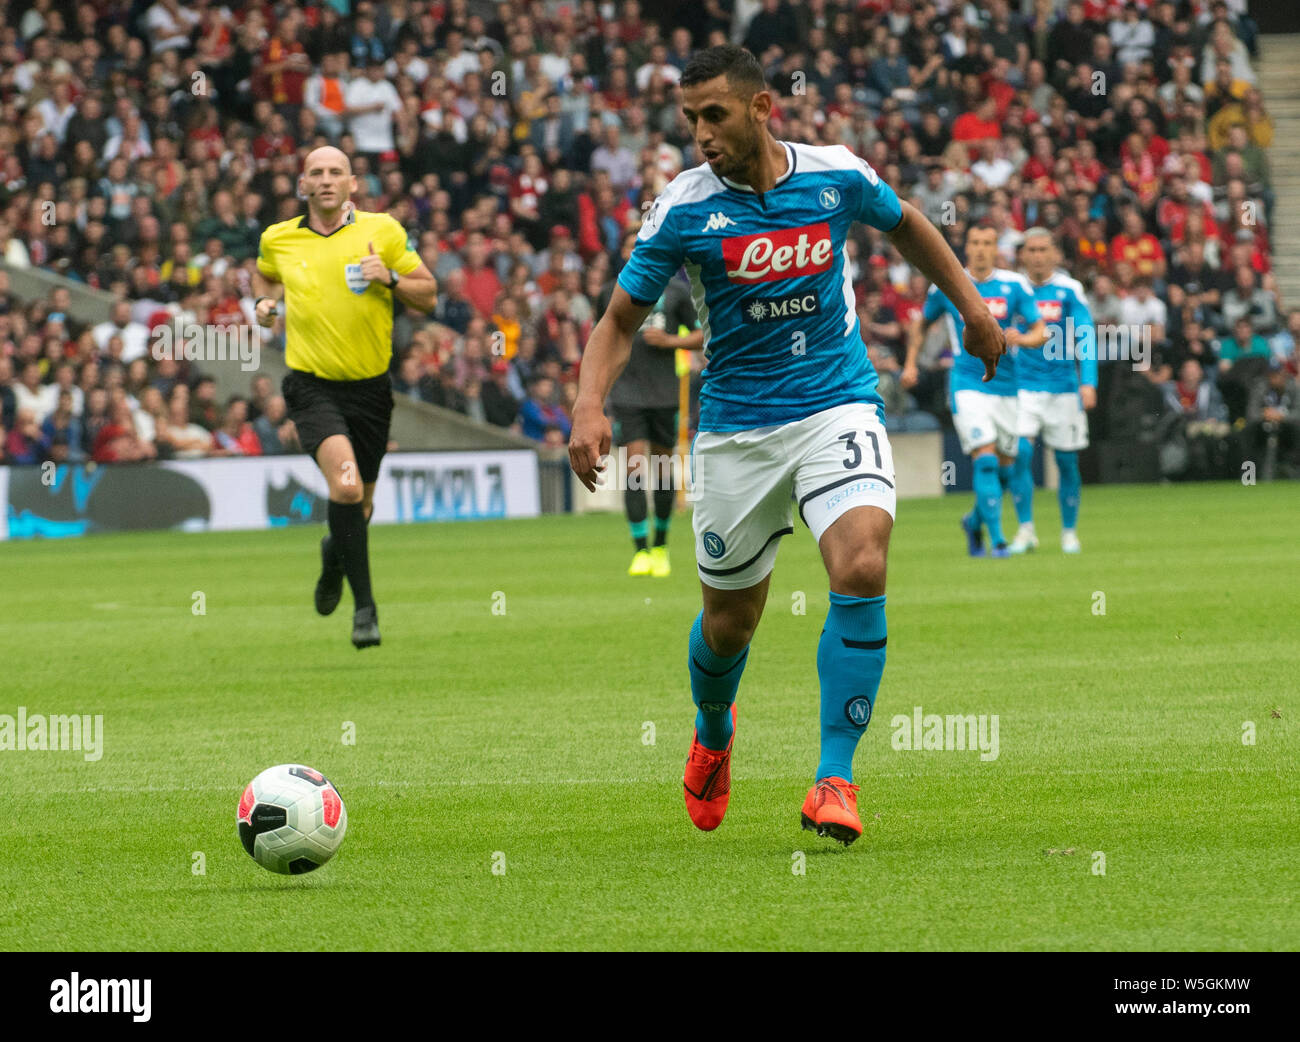 EDINBURGH, SCOTLAND - JULY 28:  Napoli Left-Back, Faouzi Ghoulam, during the Pre-Season Friendly match between Liverpool FC and SSC Napoli at Murrayfield on July 28, 2019 in Edinburgh, Scotland. (Photo by MB Media) Stock Photo